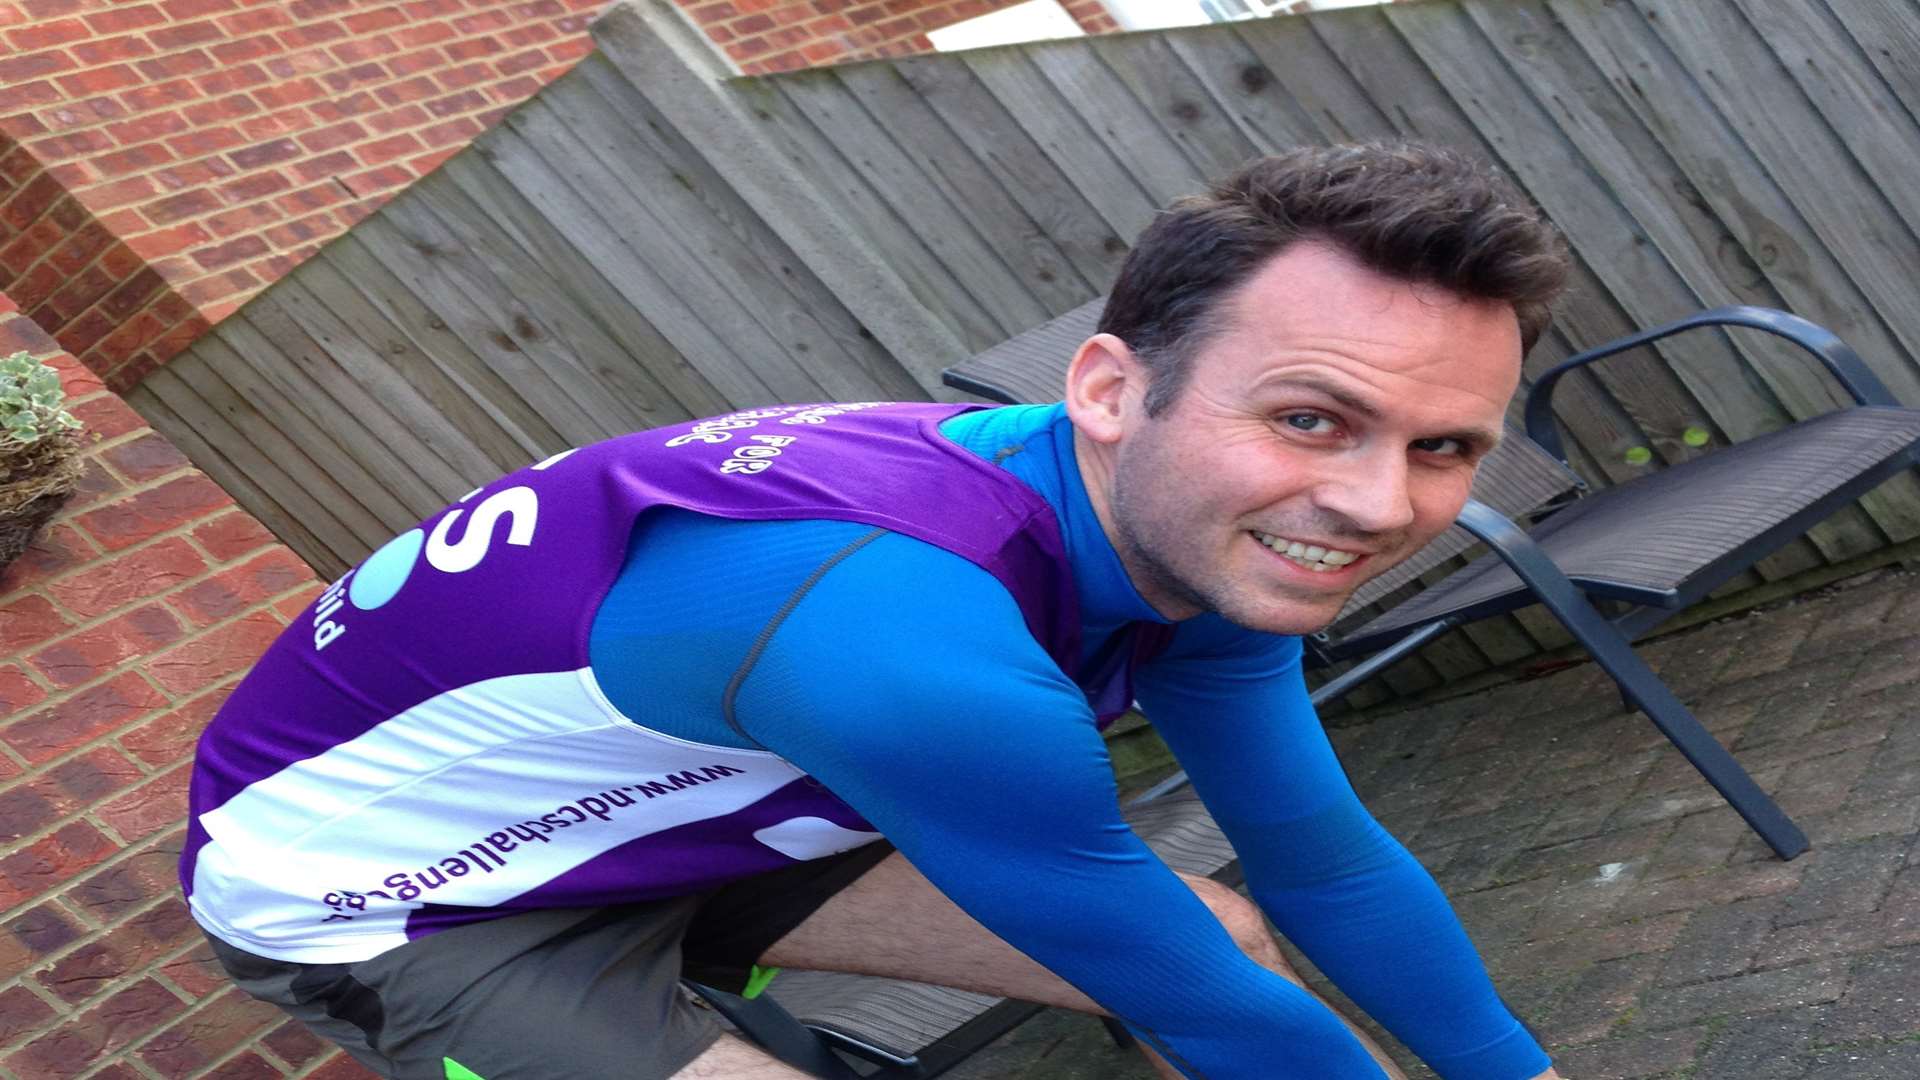 Gary Dunster is running the 2015 London Marathon for the National Deaf Children's Charity, which has helped his son Isaac